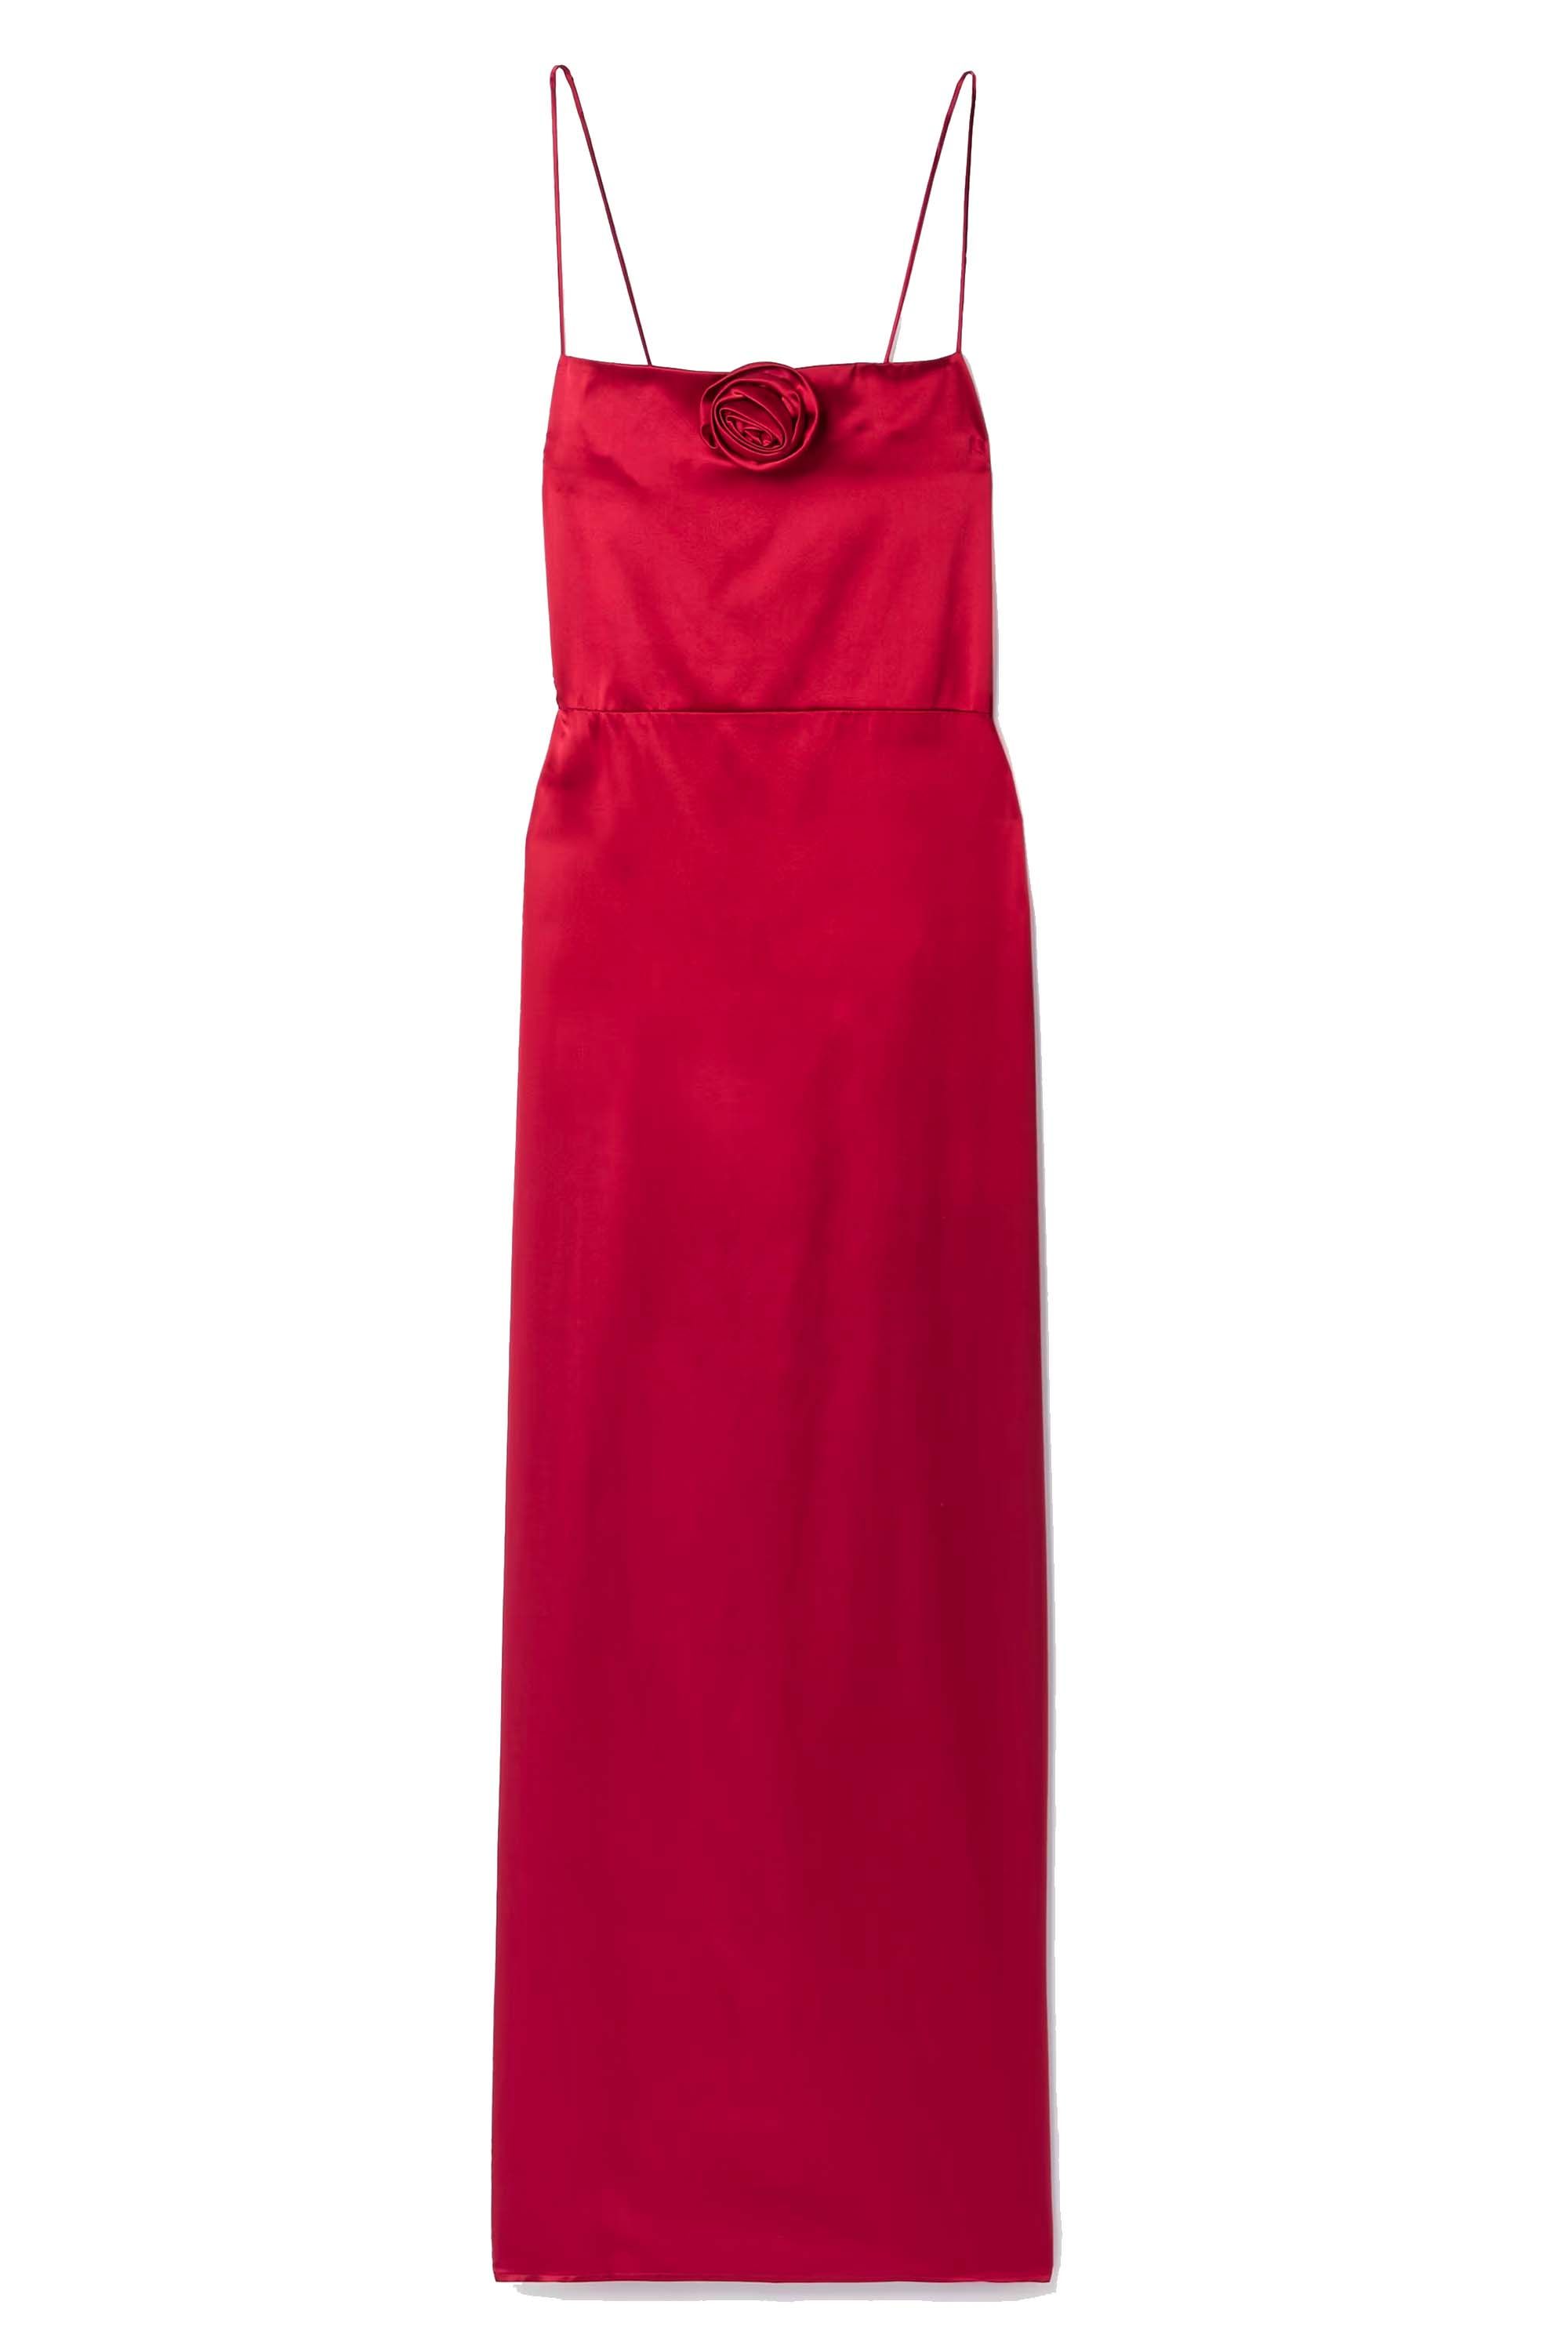 Buy Red Silk Slip Dress for Special Occasions and Everyday, Satin Slip Dress  for Summer, Silk Camisole Dress, Silk Midi Dress, Summer Dress Online in  India - Etsy